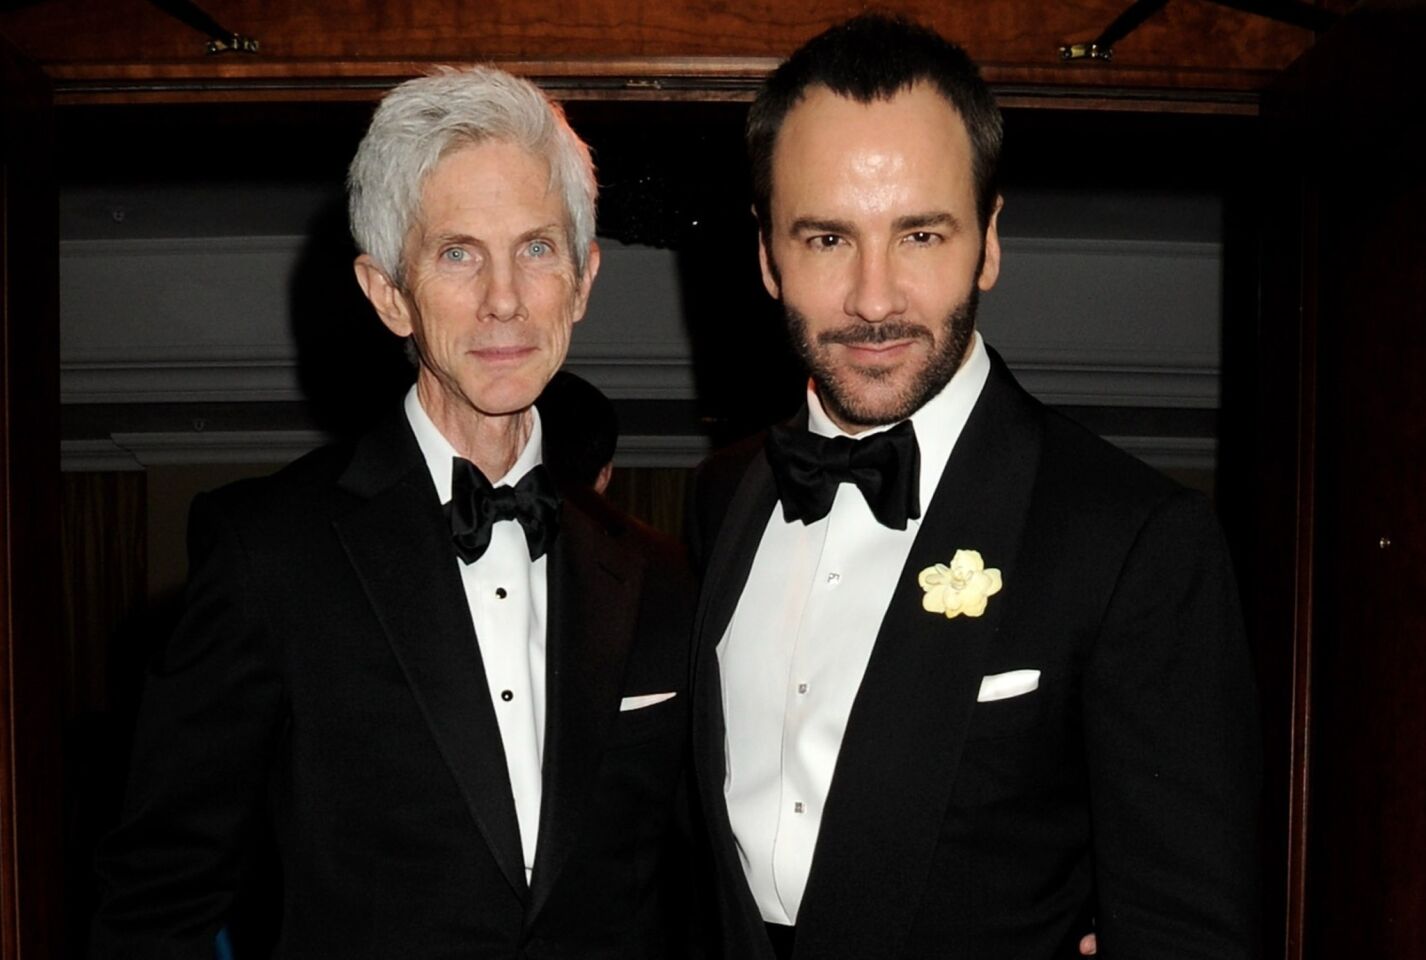 Celebrity weddings & engagements | Richard Buckley and Tom Ford